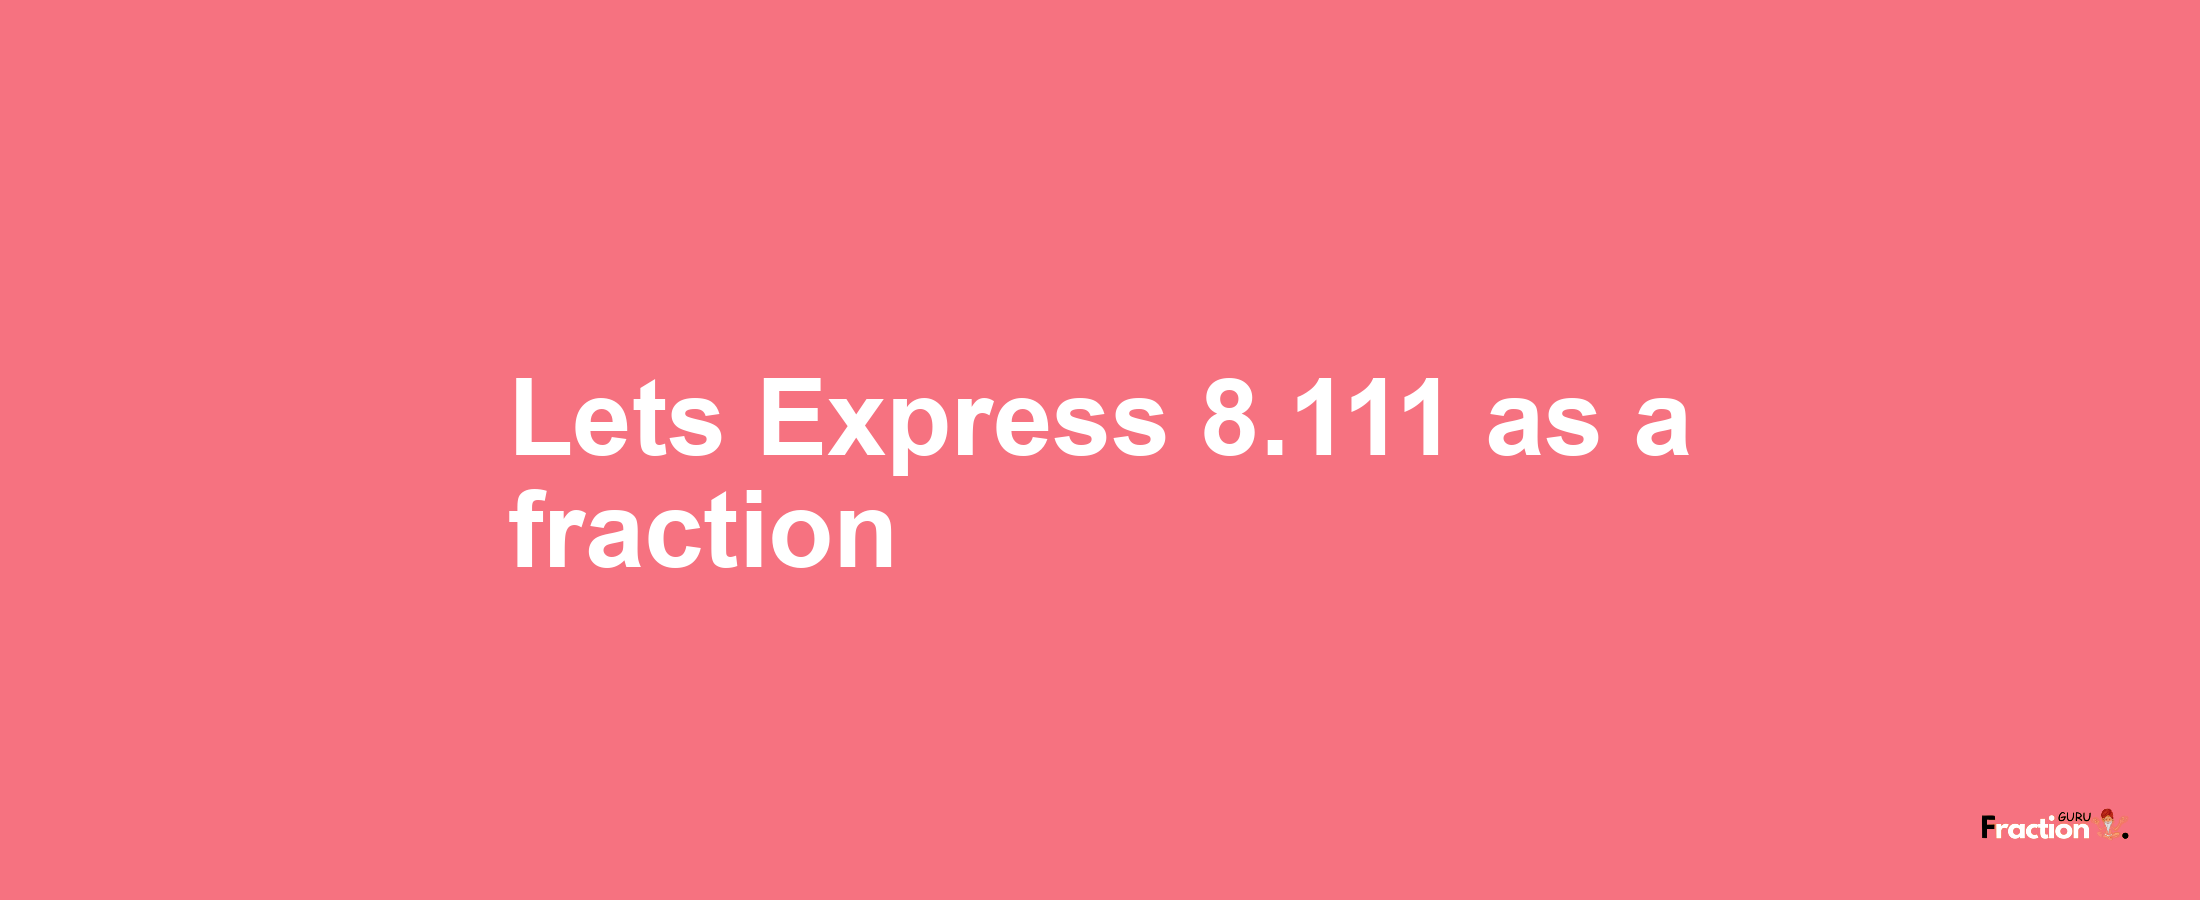 Lets Express 8.111 as afraction